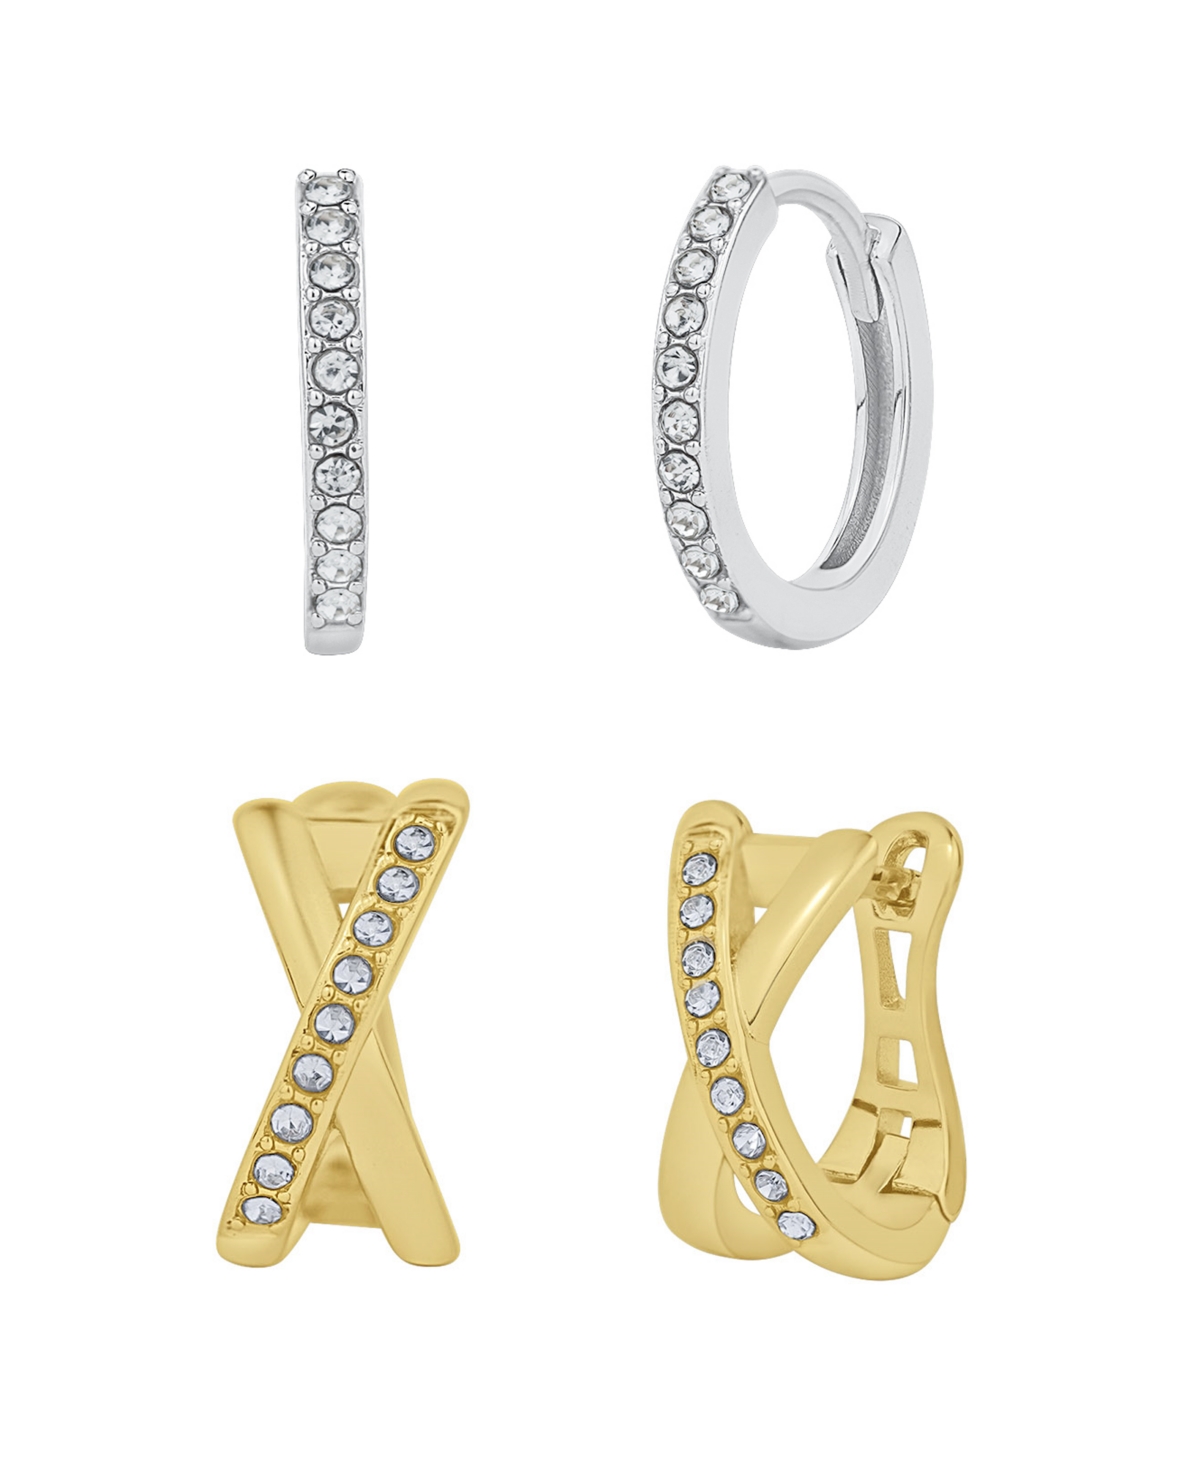 And Now This Clear Crystal Stone Hoop Earring Set In Gold Plated And Silver Plated